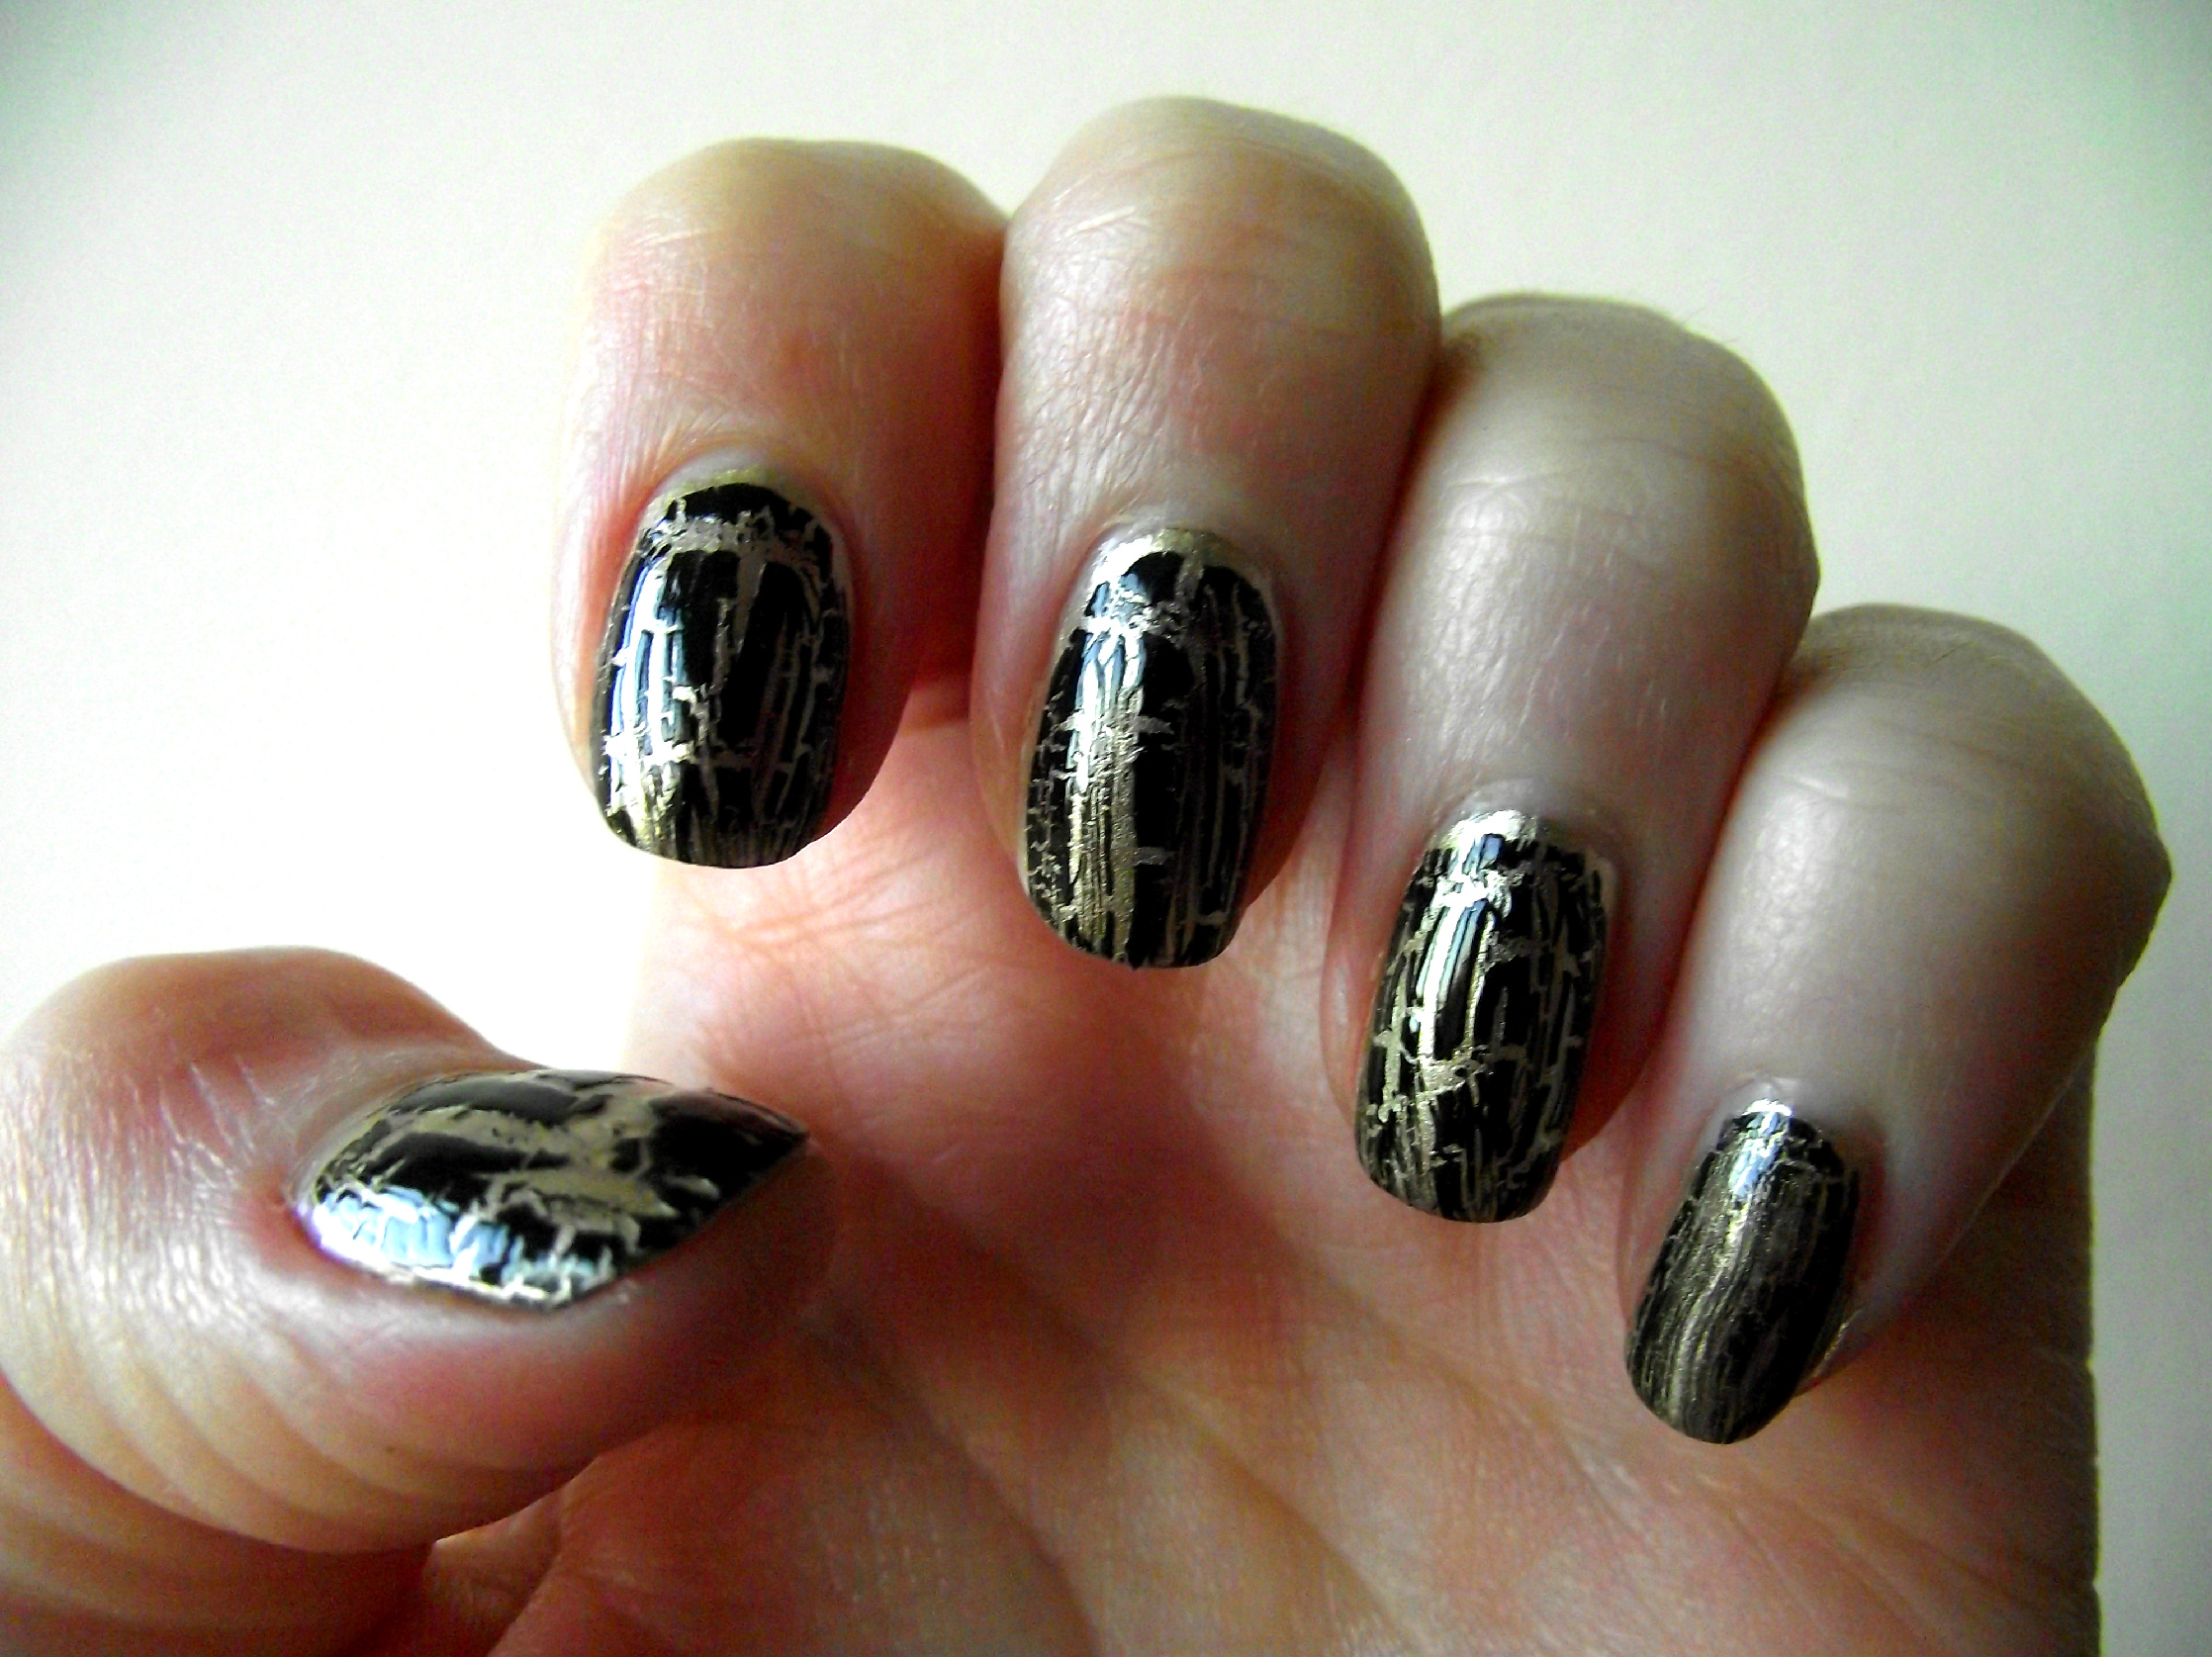 I used one coat of the Barry M Instant Nail Effects foil varnish in '320′